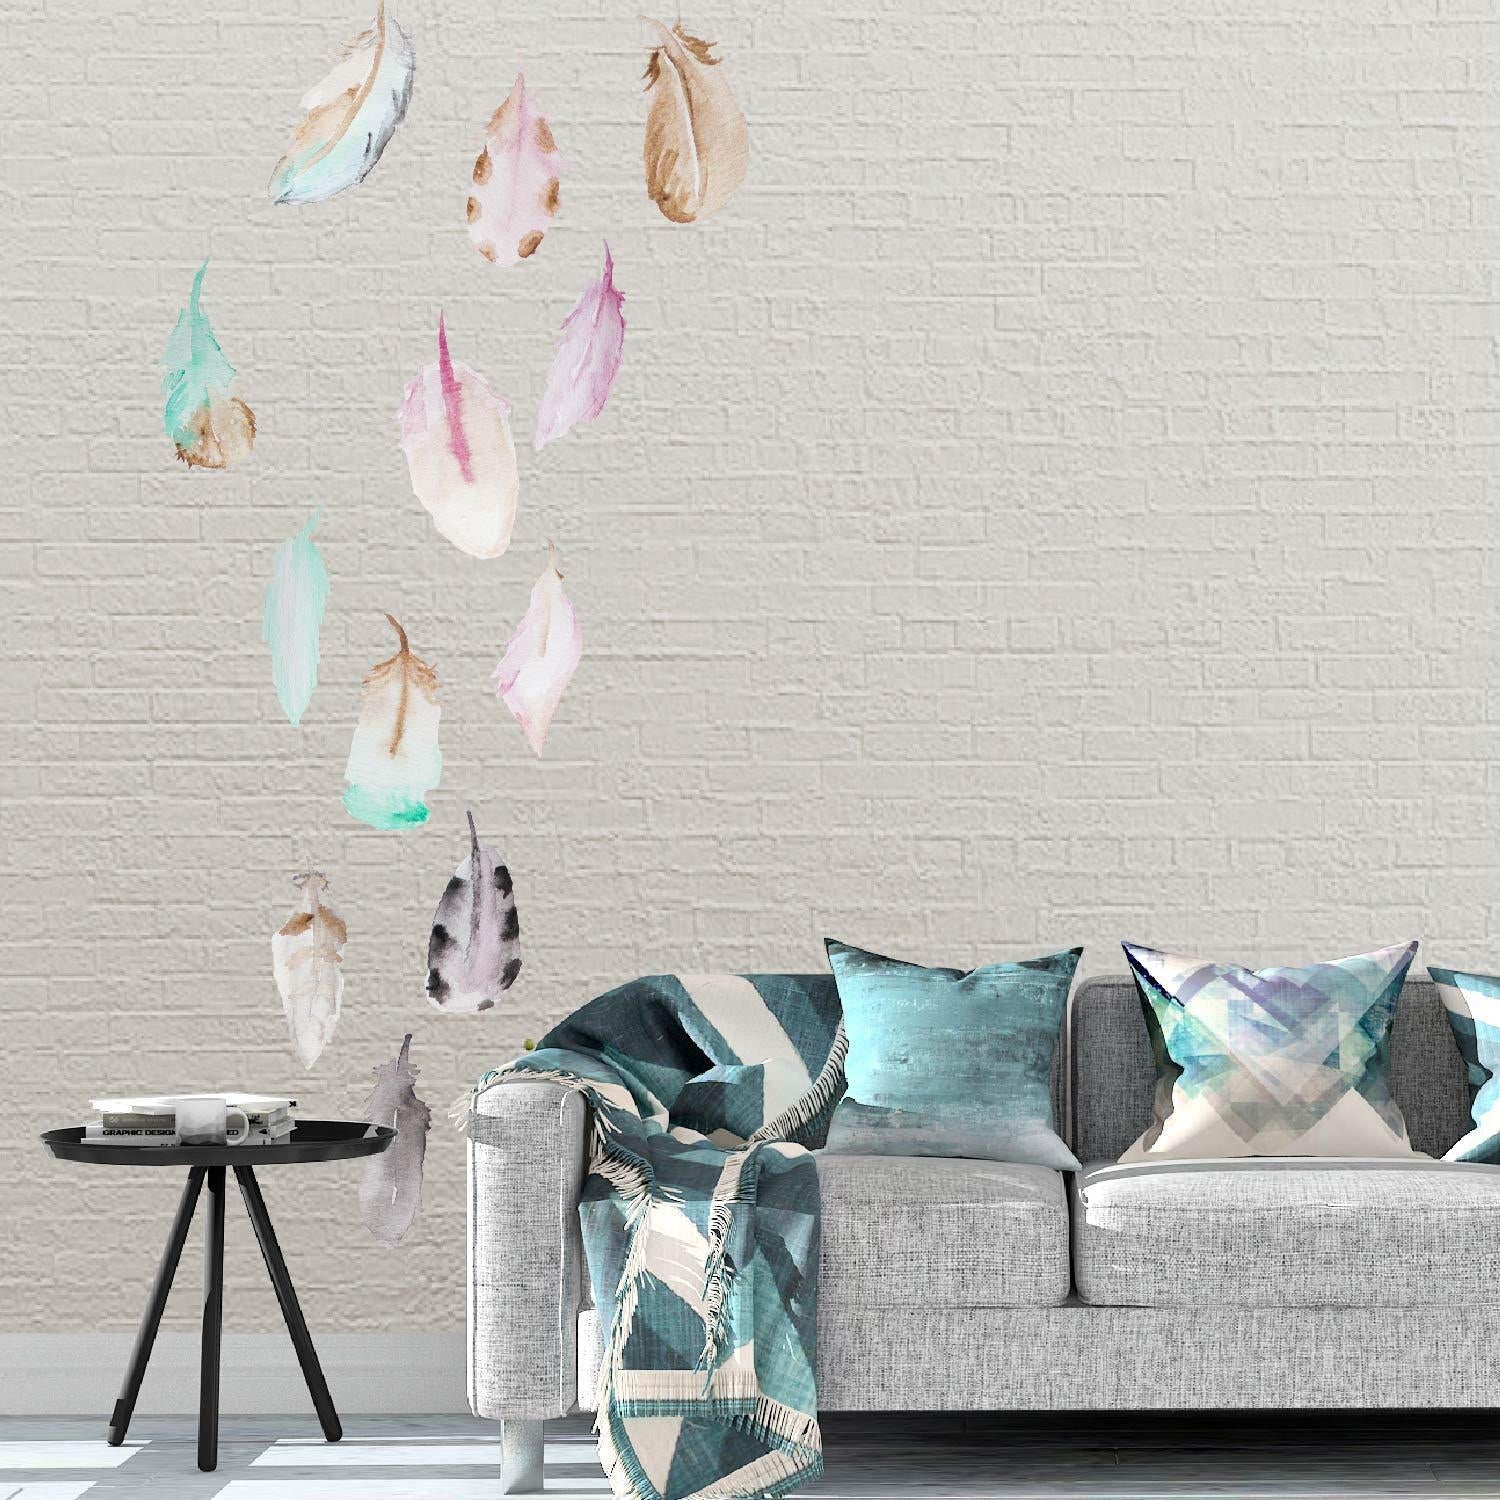 Watercolor Feathers - Peel and Stick Removable Wall Decals - Picture Perfect Decals